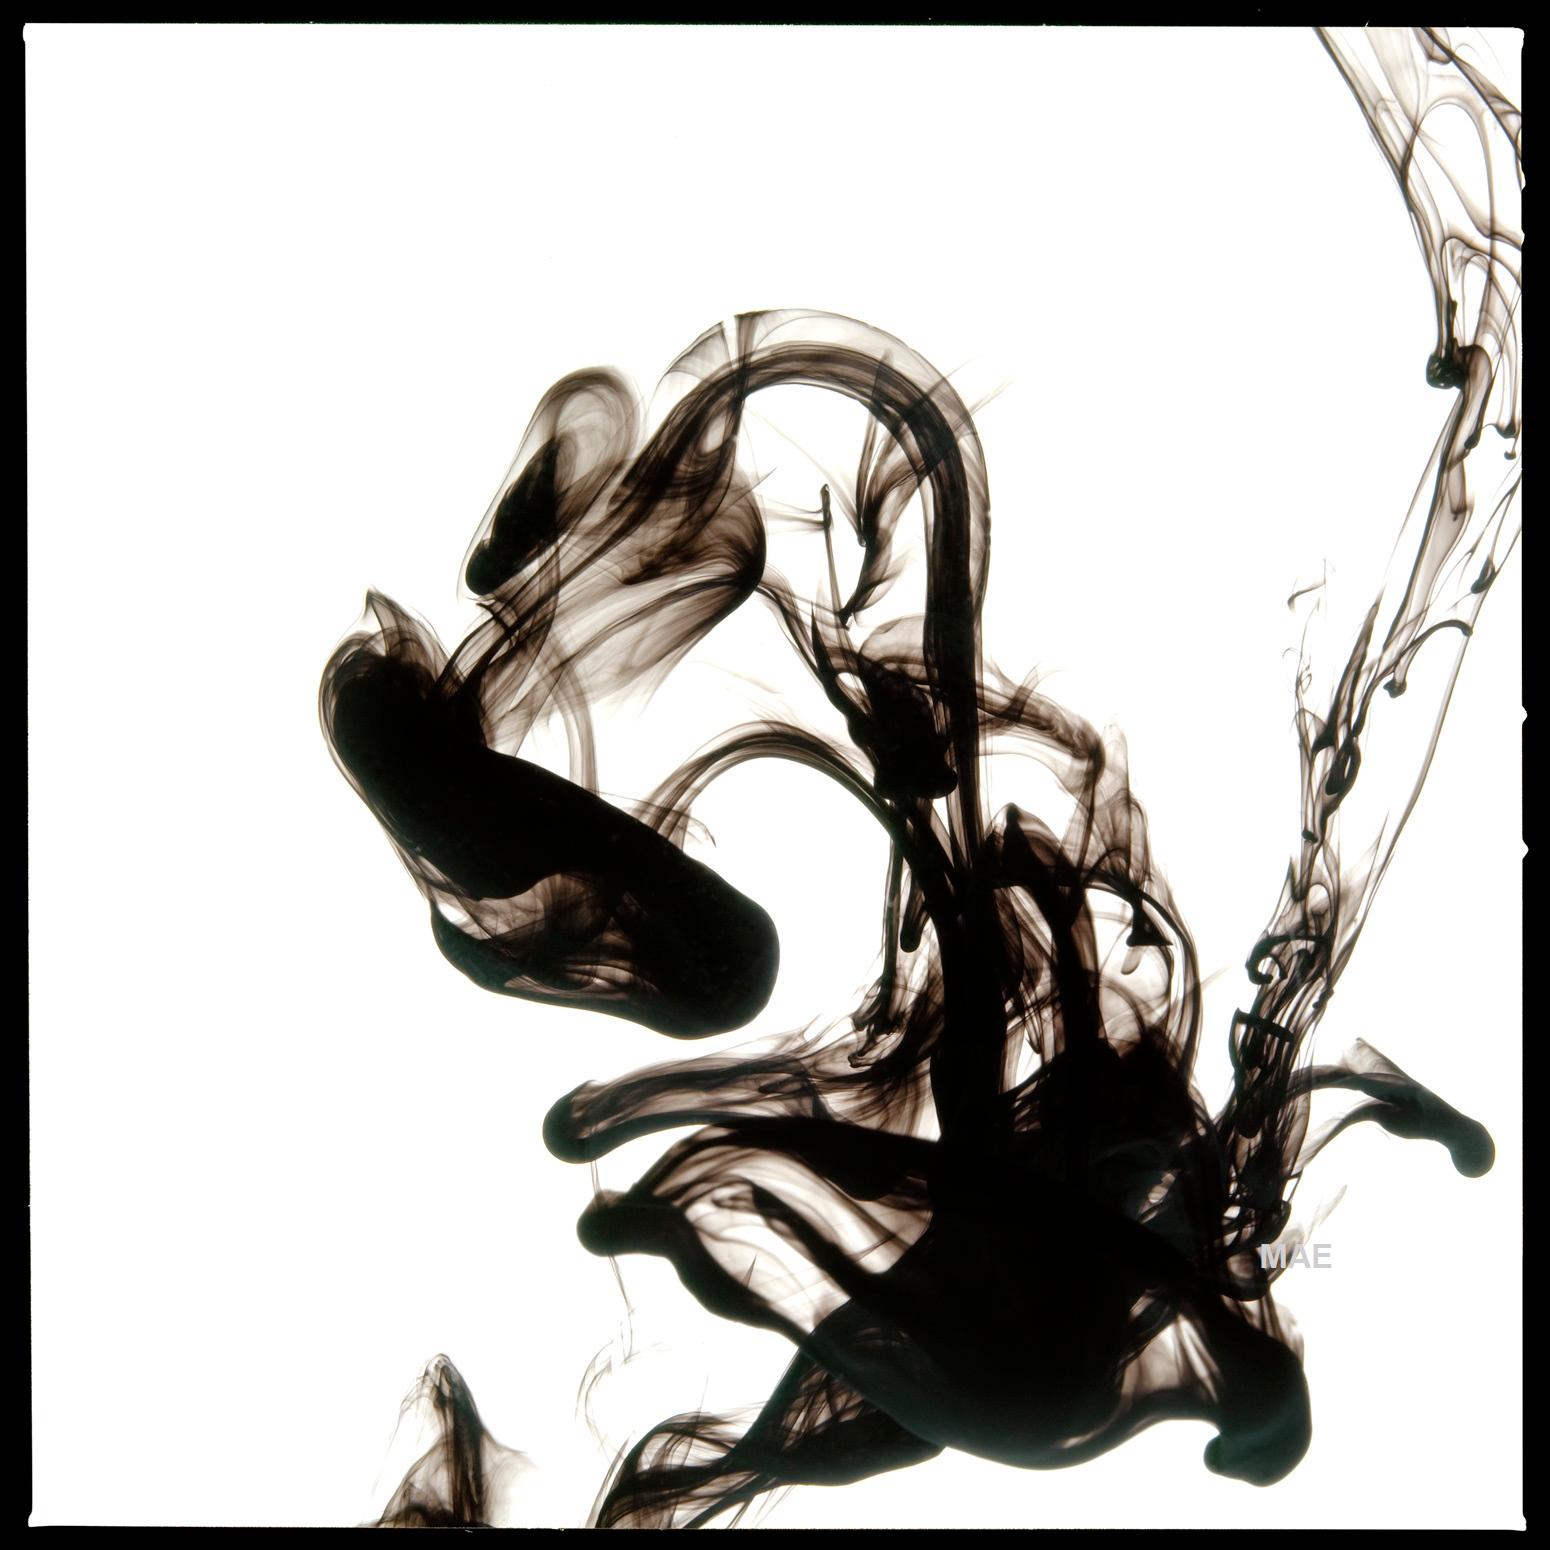 MAE Curates Black and White Photograph - Art Photography - Fluid Rings of Sultry II (40x40”)